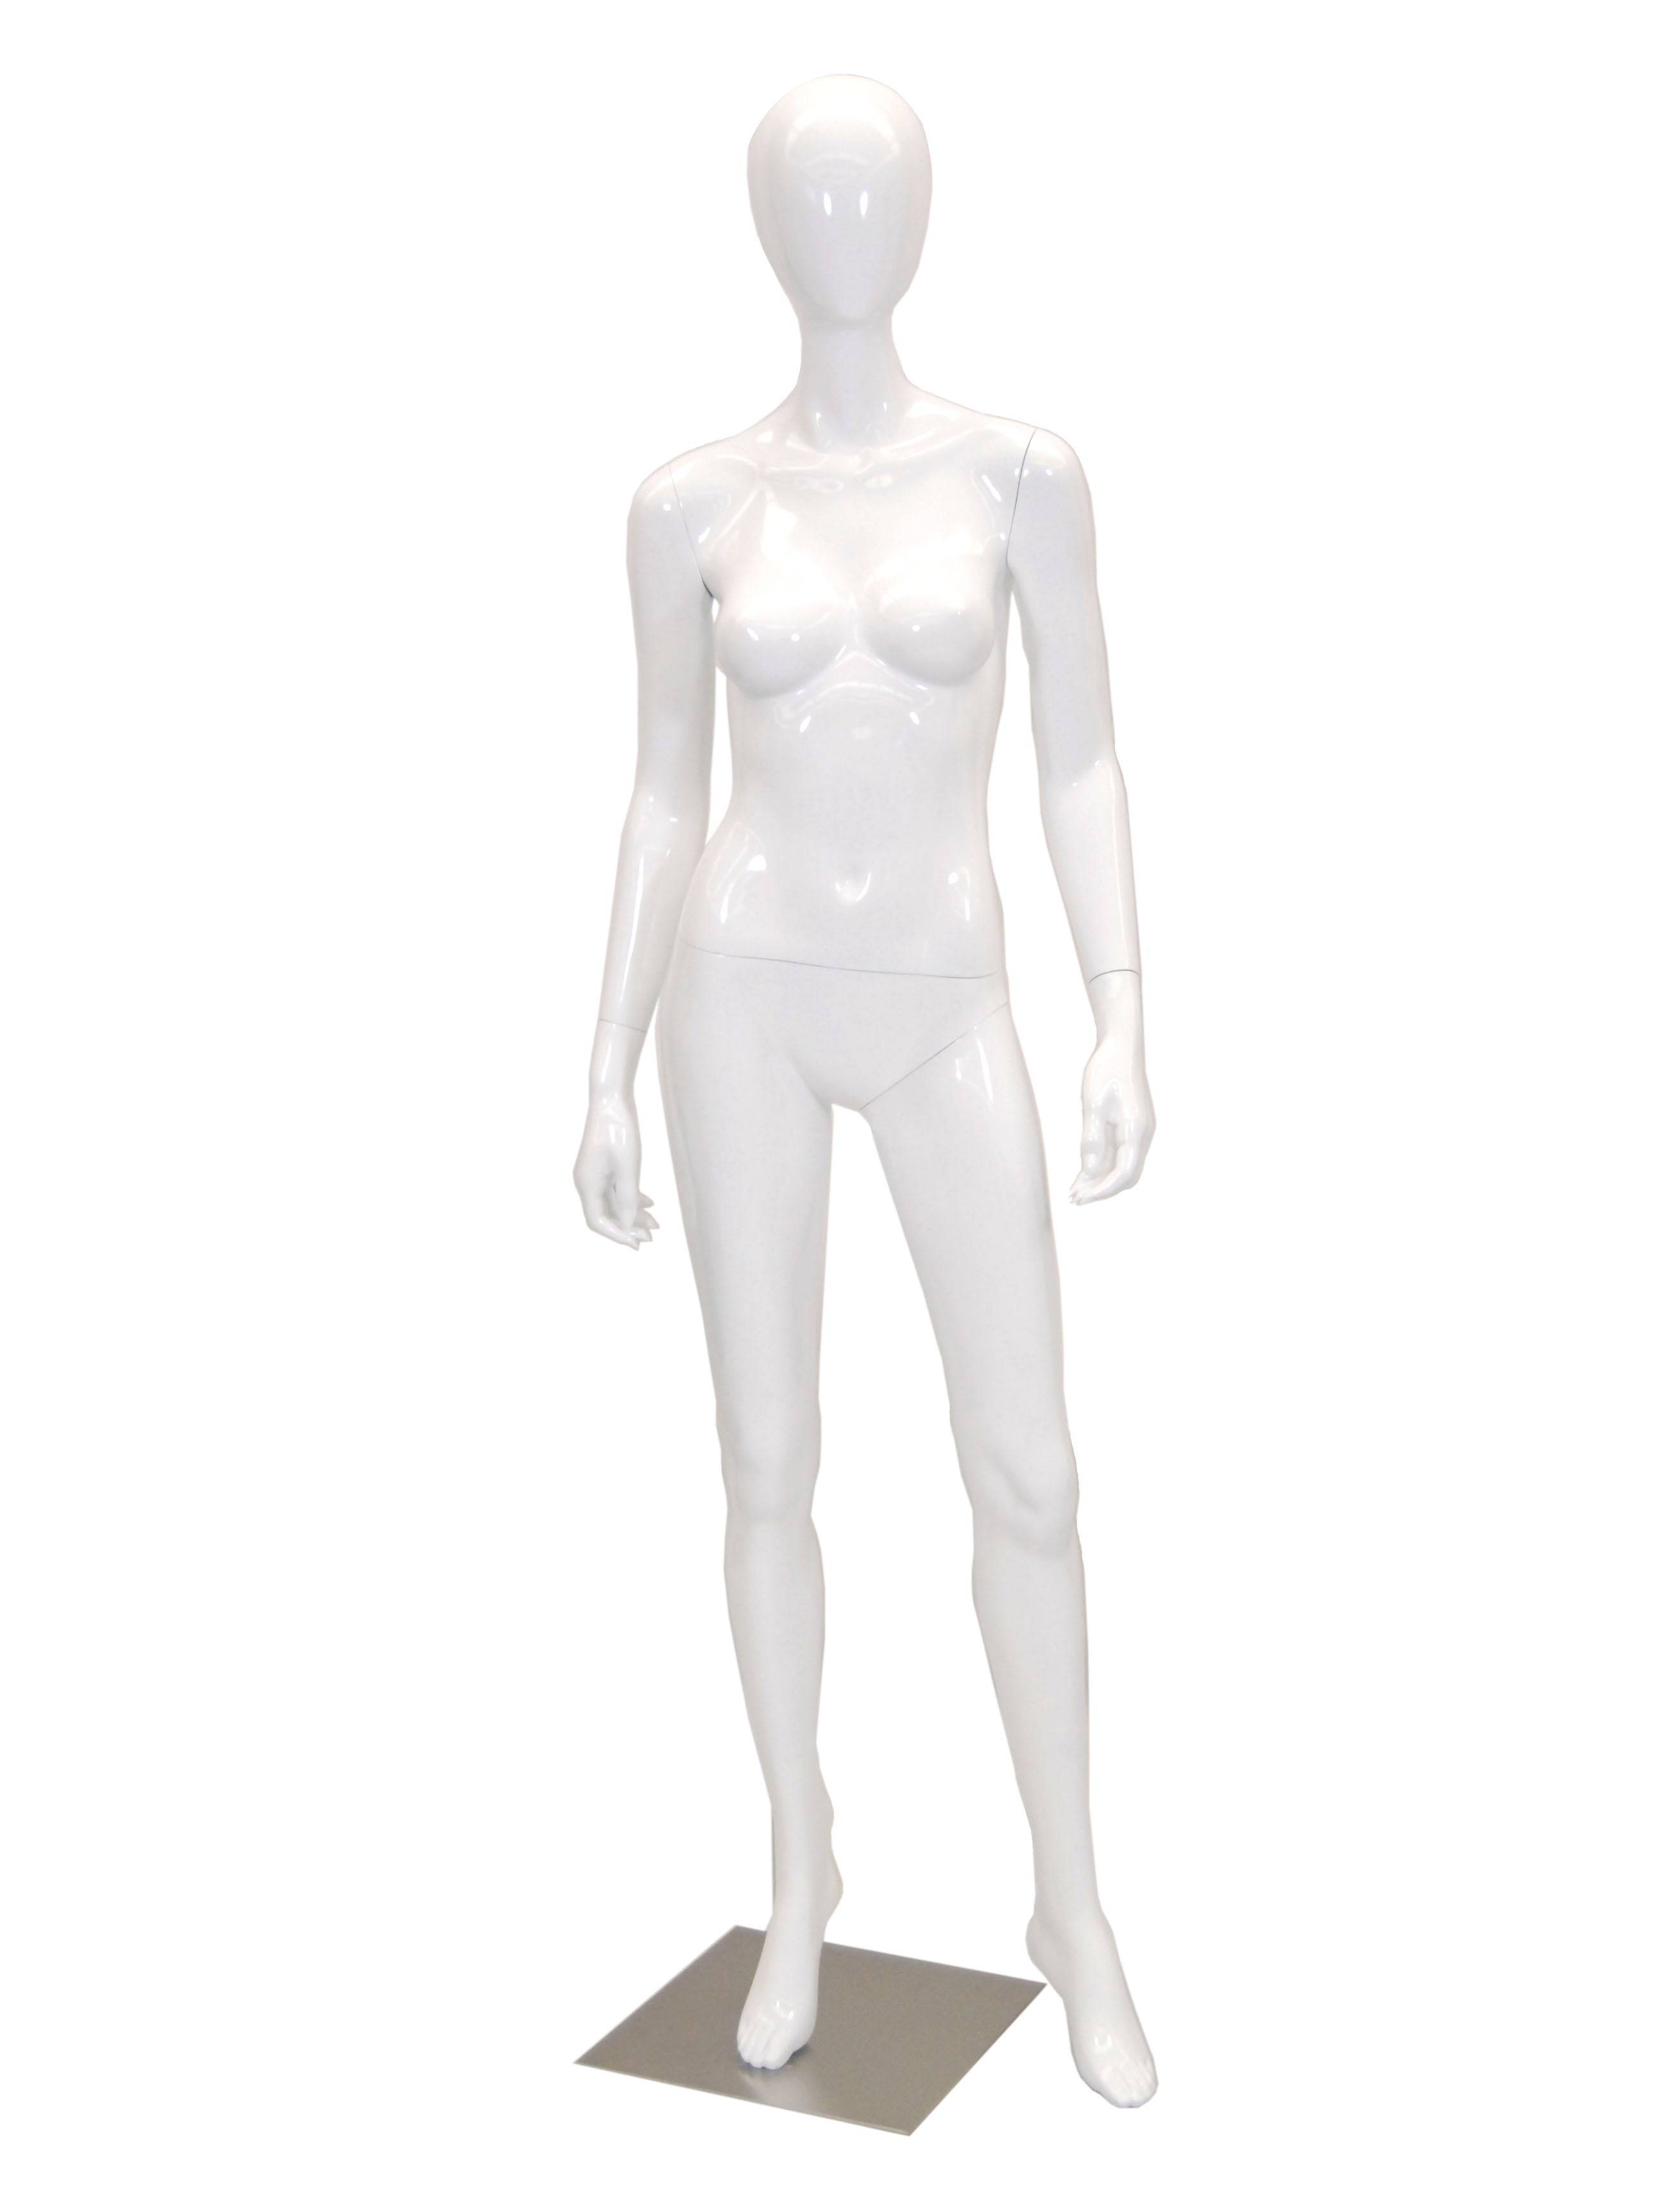 Glossy White Male Plastic Mannequin (COPY)